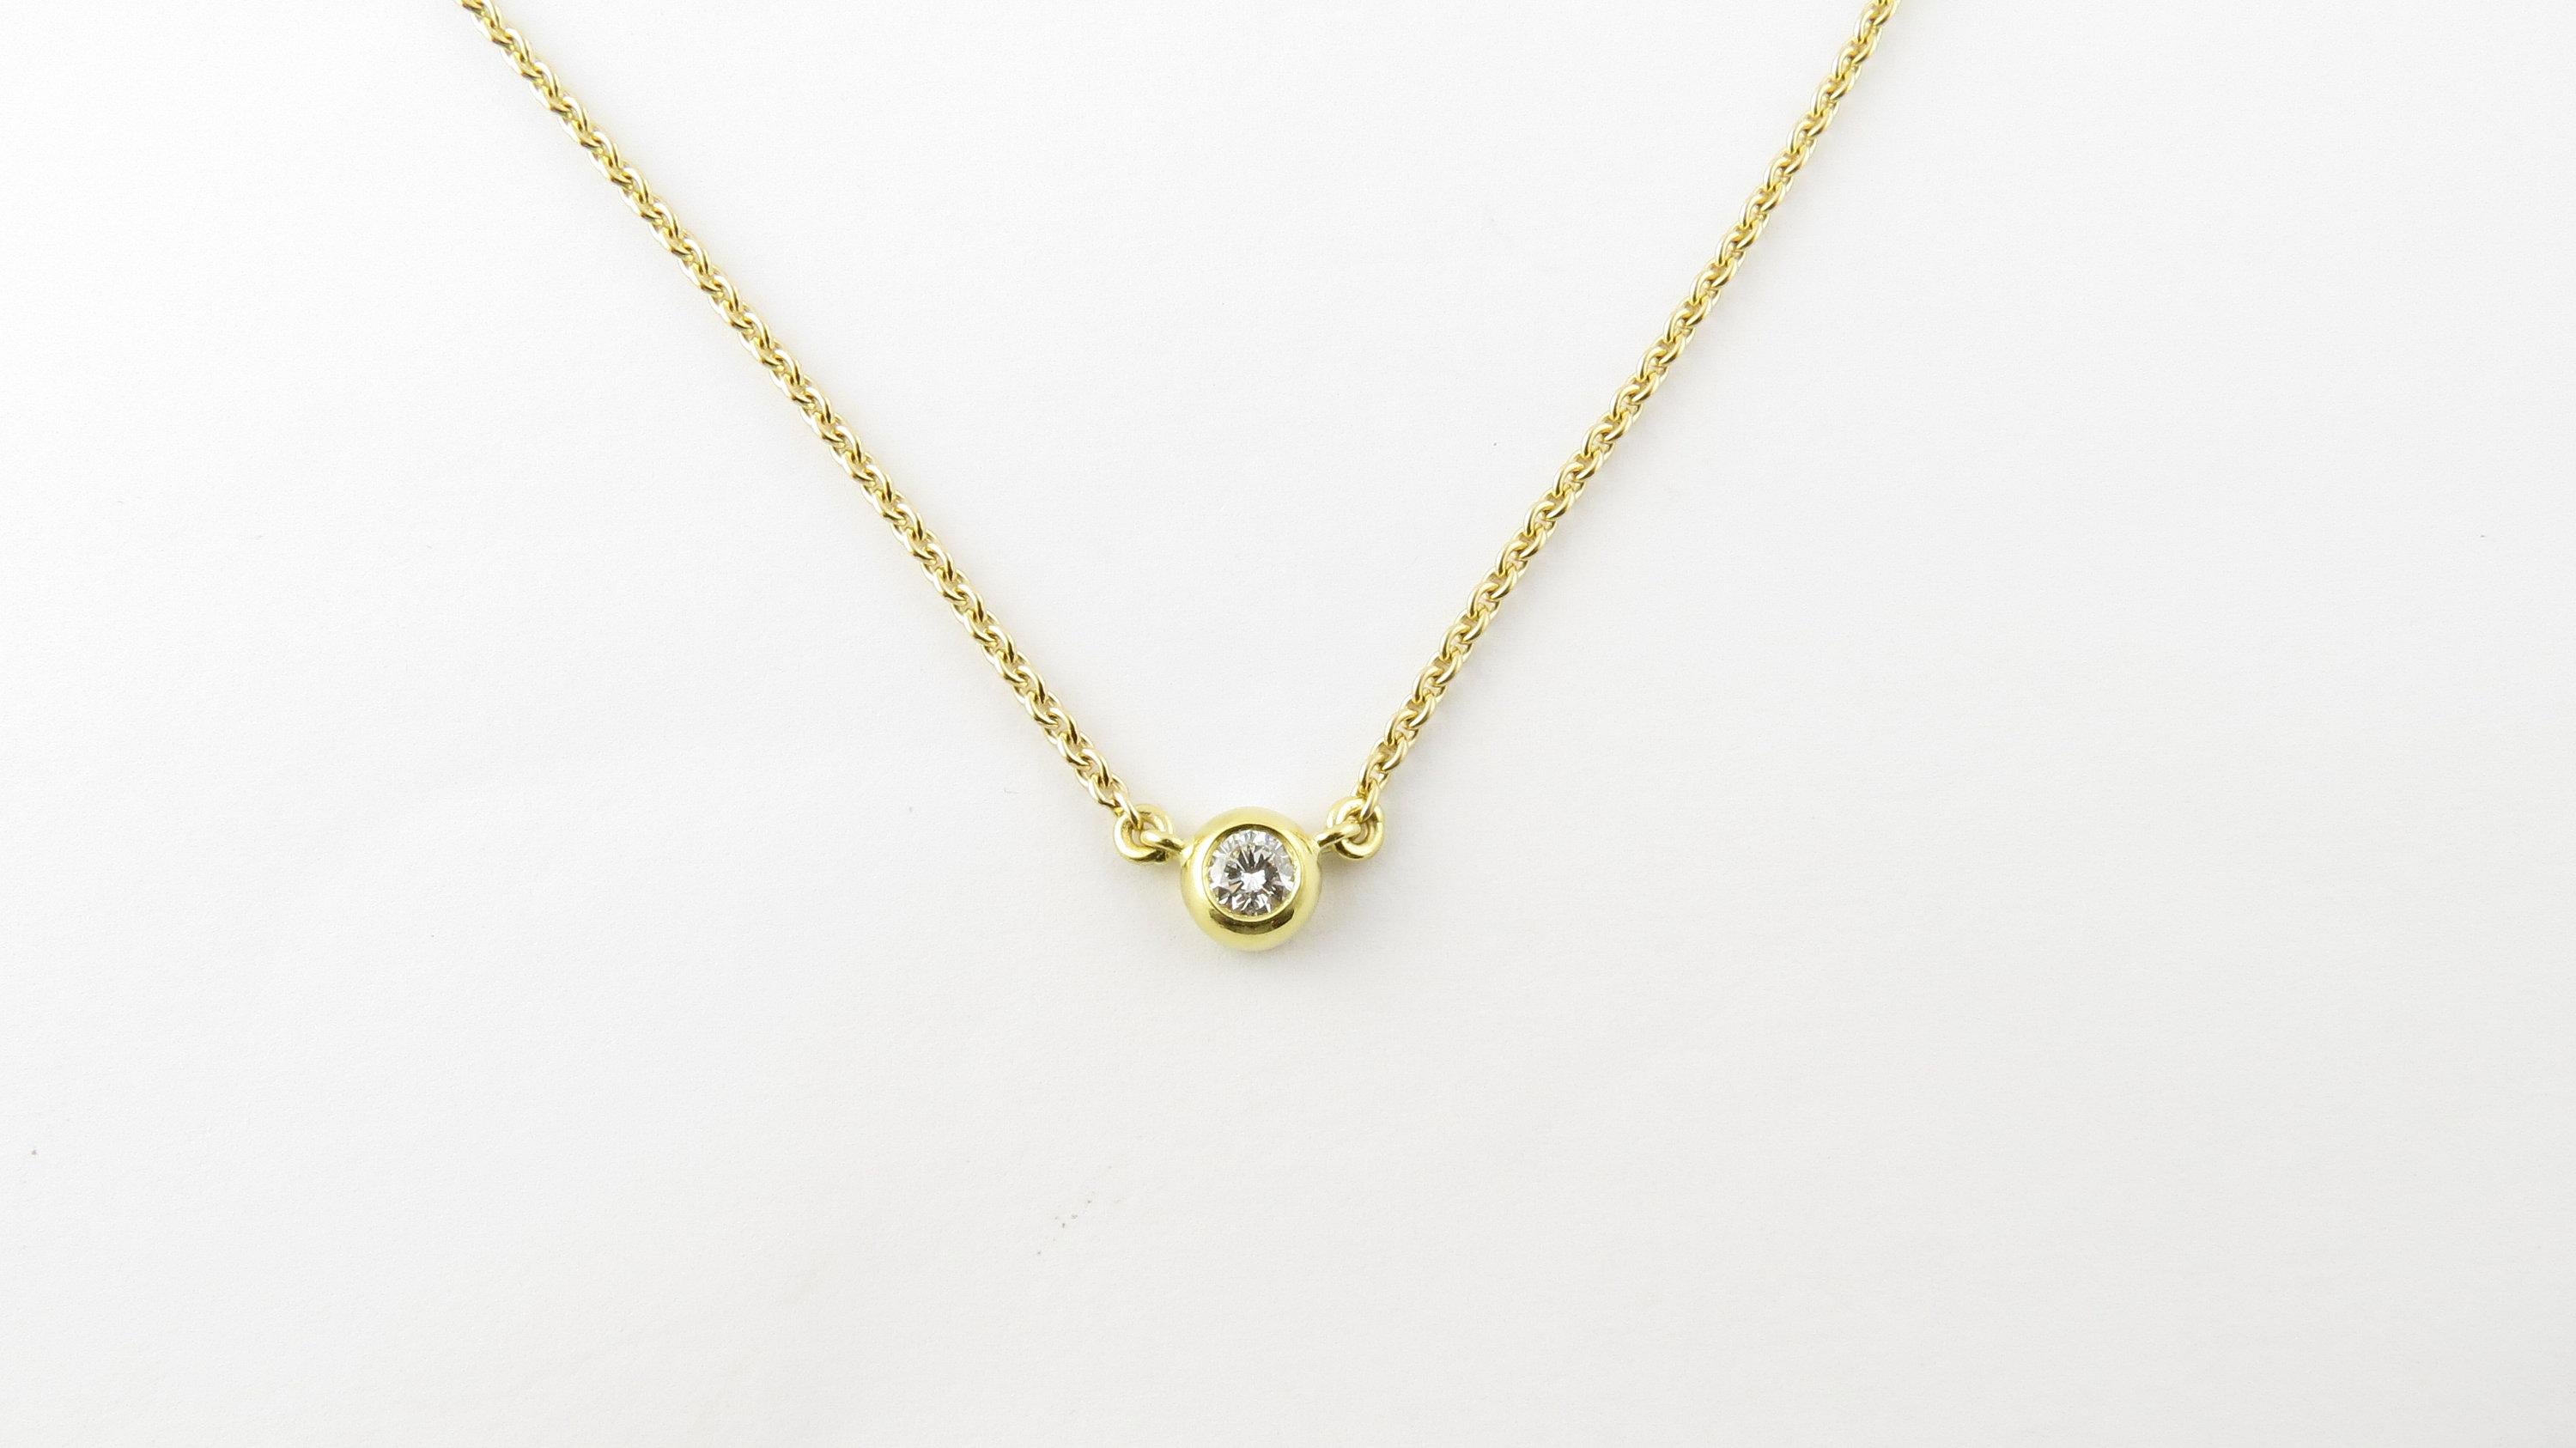 Vintage 14 Karat Yellow Gold Diamond Solitaire Necklace. This stunning necklace features one round brilliant cut diamond suspended in the center of a classic 14K yellow gold chain.
Approximate total diamond weight: .30 ct. Diamond color: F Diamond